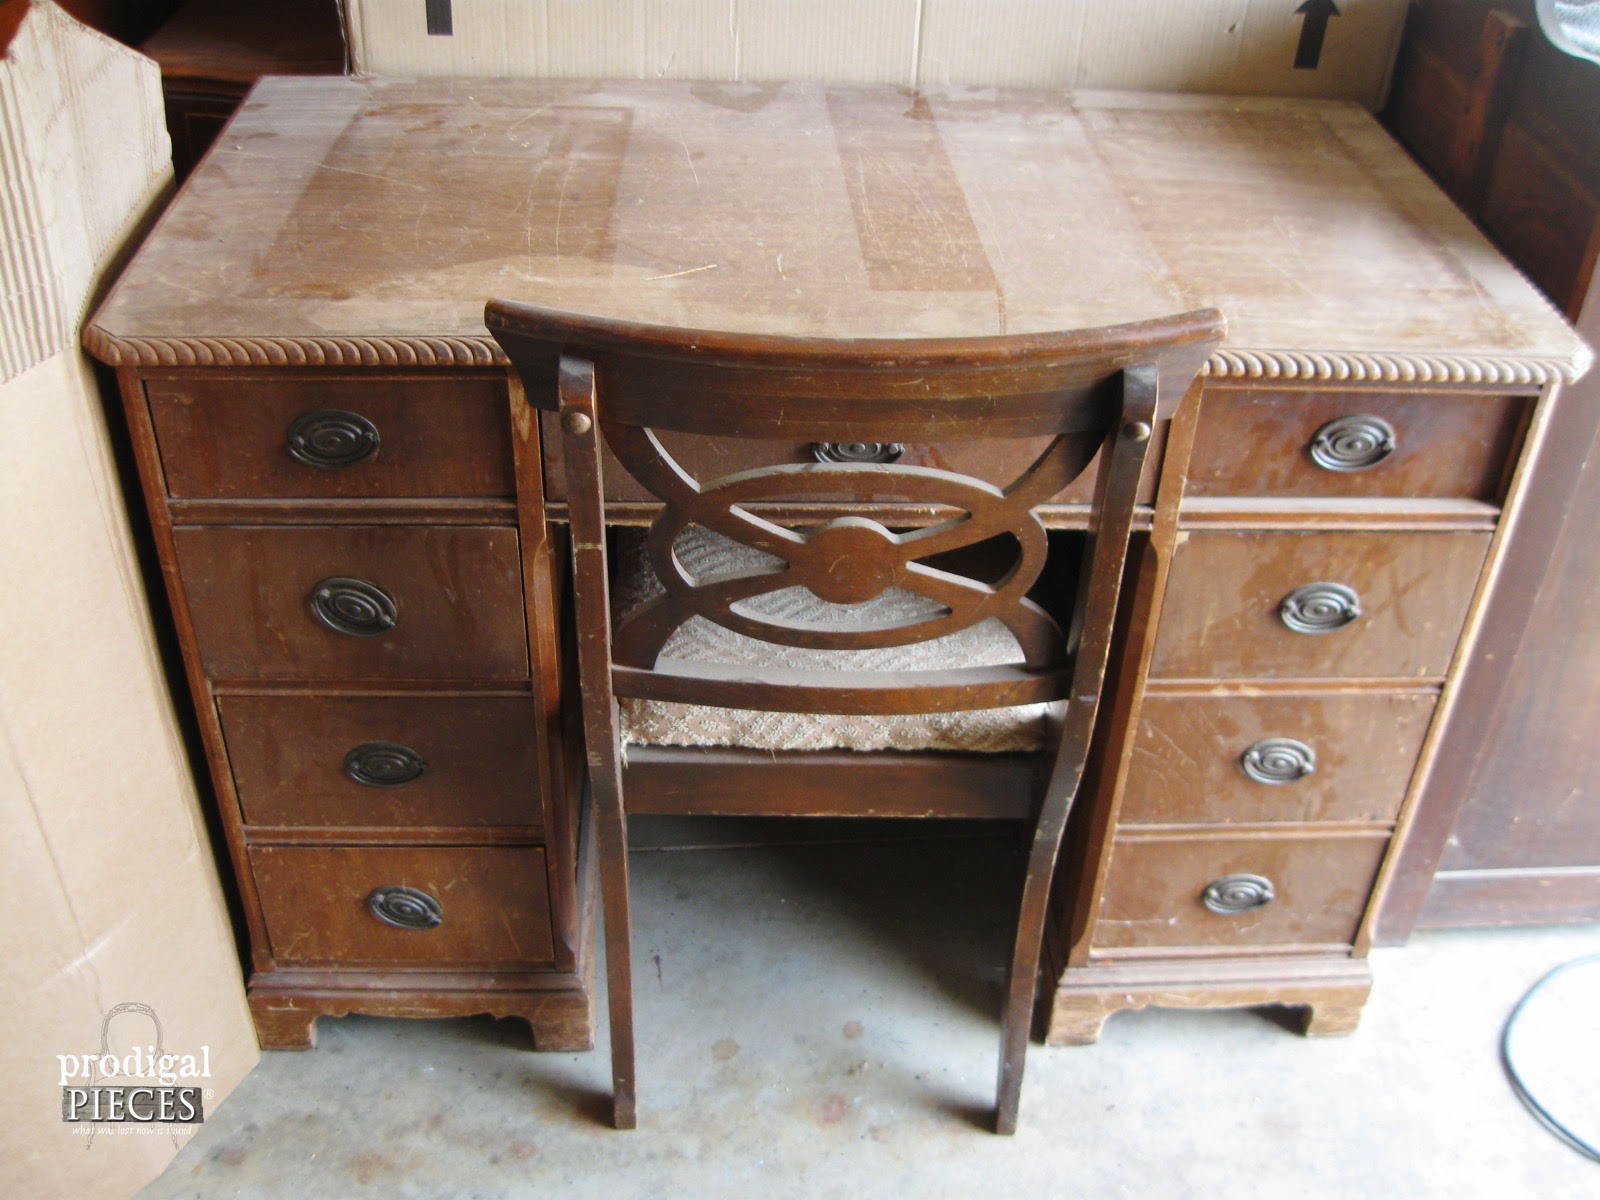 An Antique Desk Makeover by Prodigal Pieces www.prodigalpieces.com #prodigalpieces